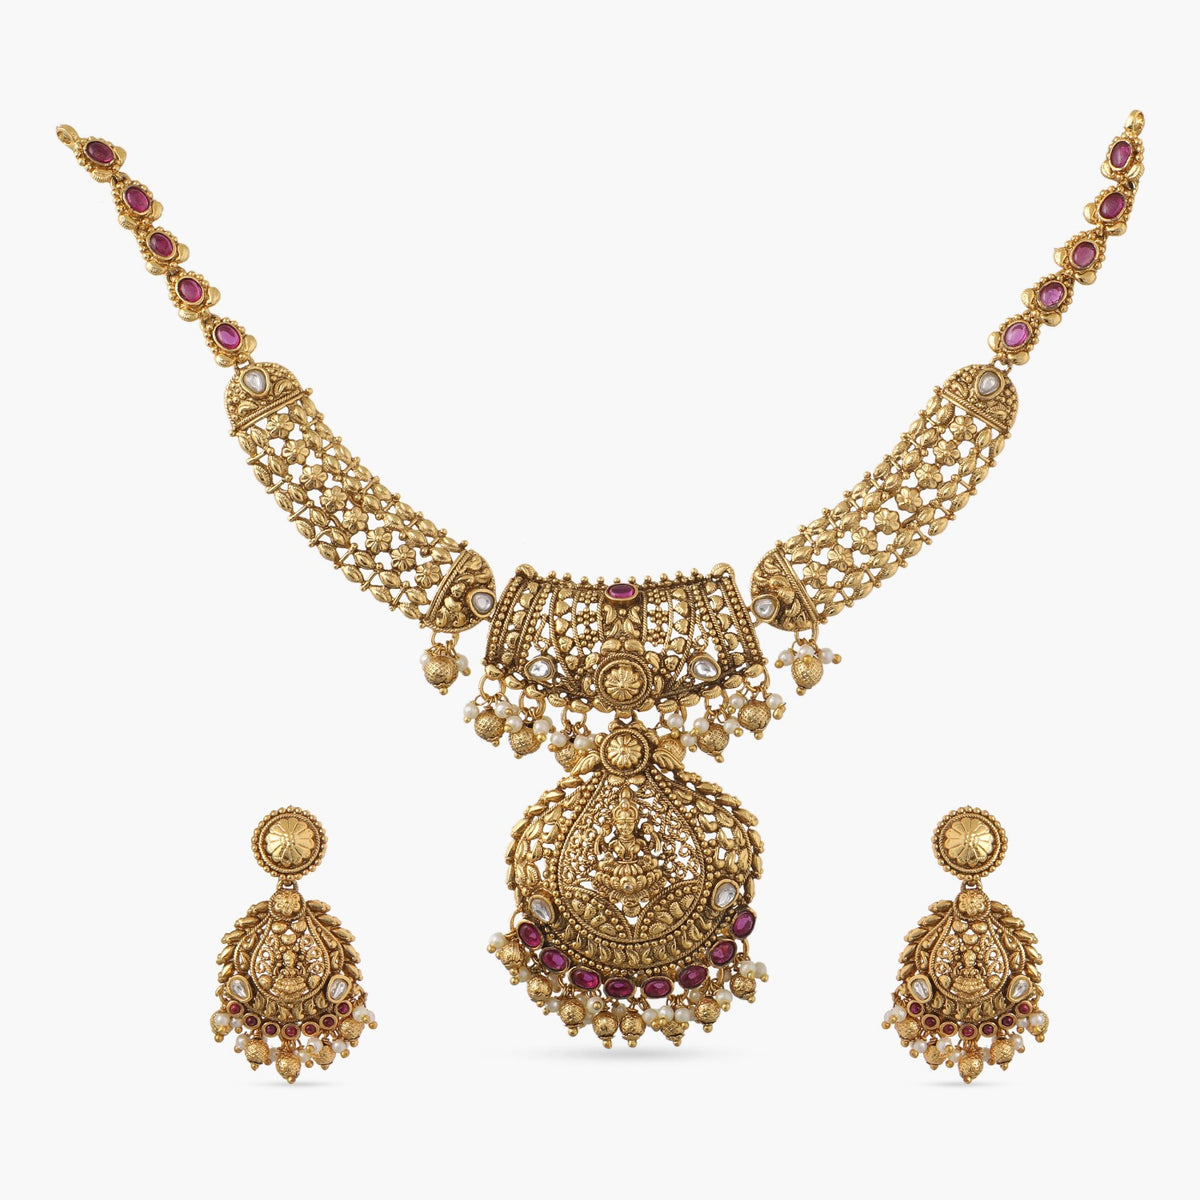 A picture of an Indian artificial gold plated necklace set with a pendant featuring Lakshmi design and red gemstones with matching earrings.